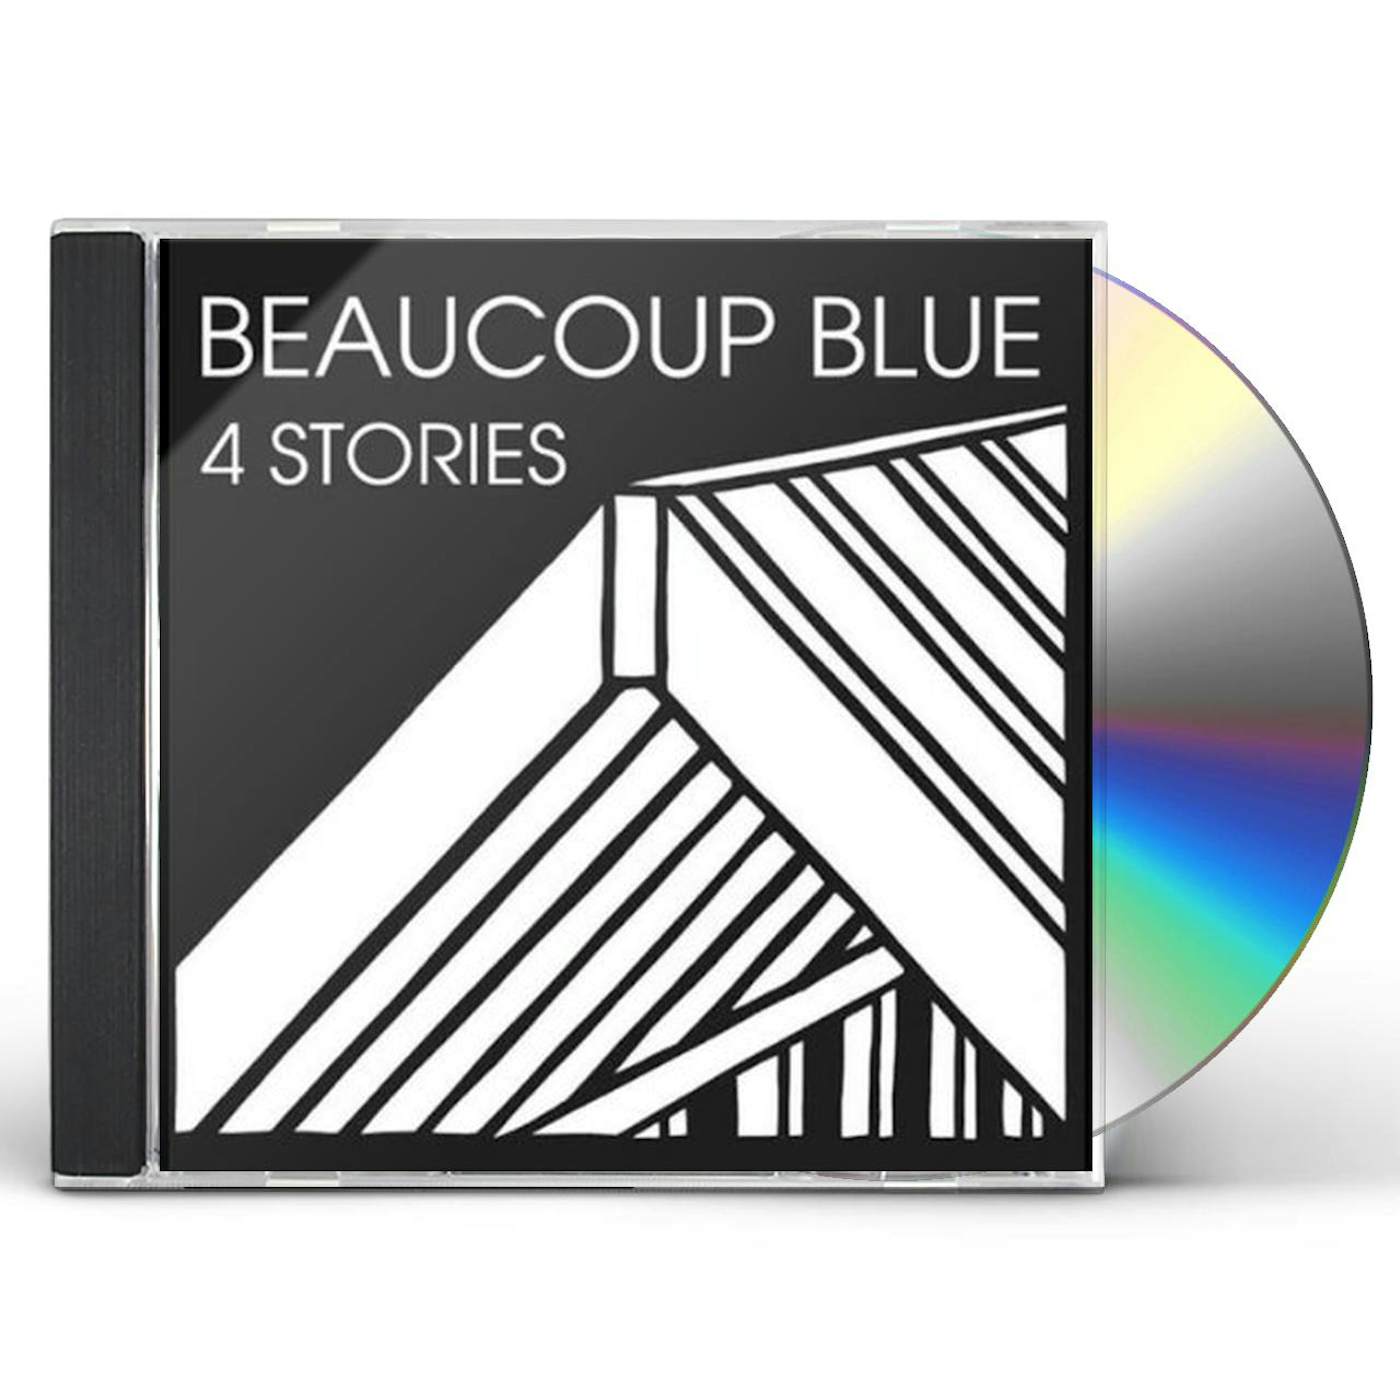 Beaucoup Blue 4 STORIES CD